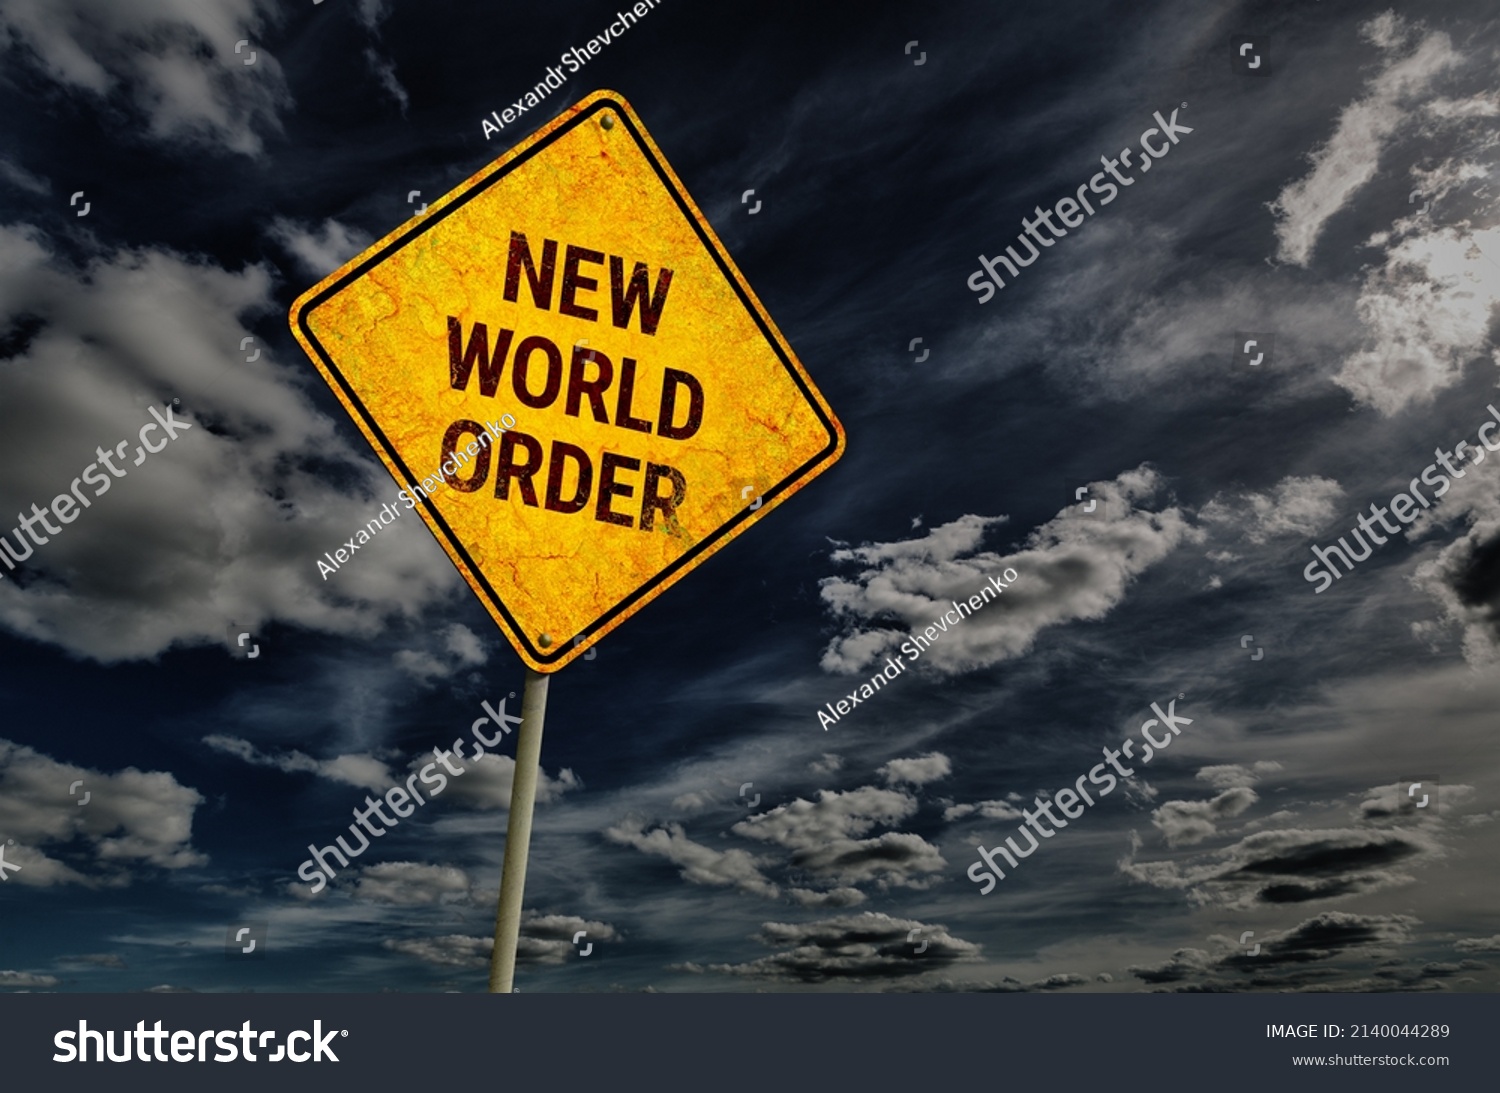 Dark blue sky with cumulus clouds and yellow rhombic road sign with text New World Order #2140044289